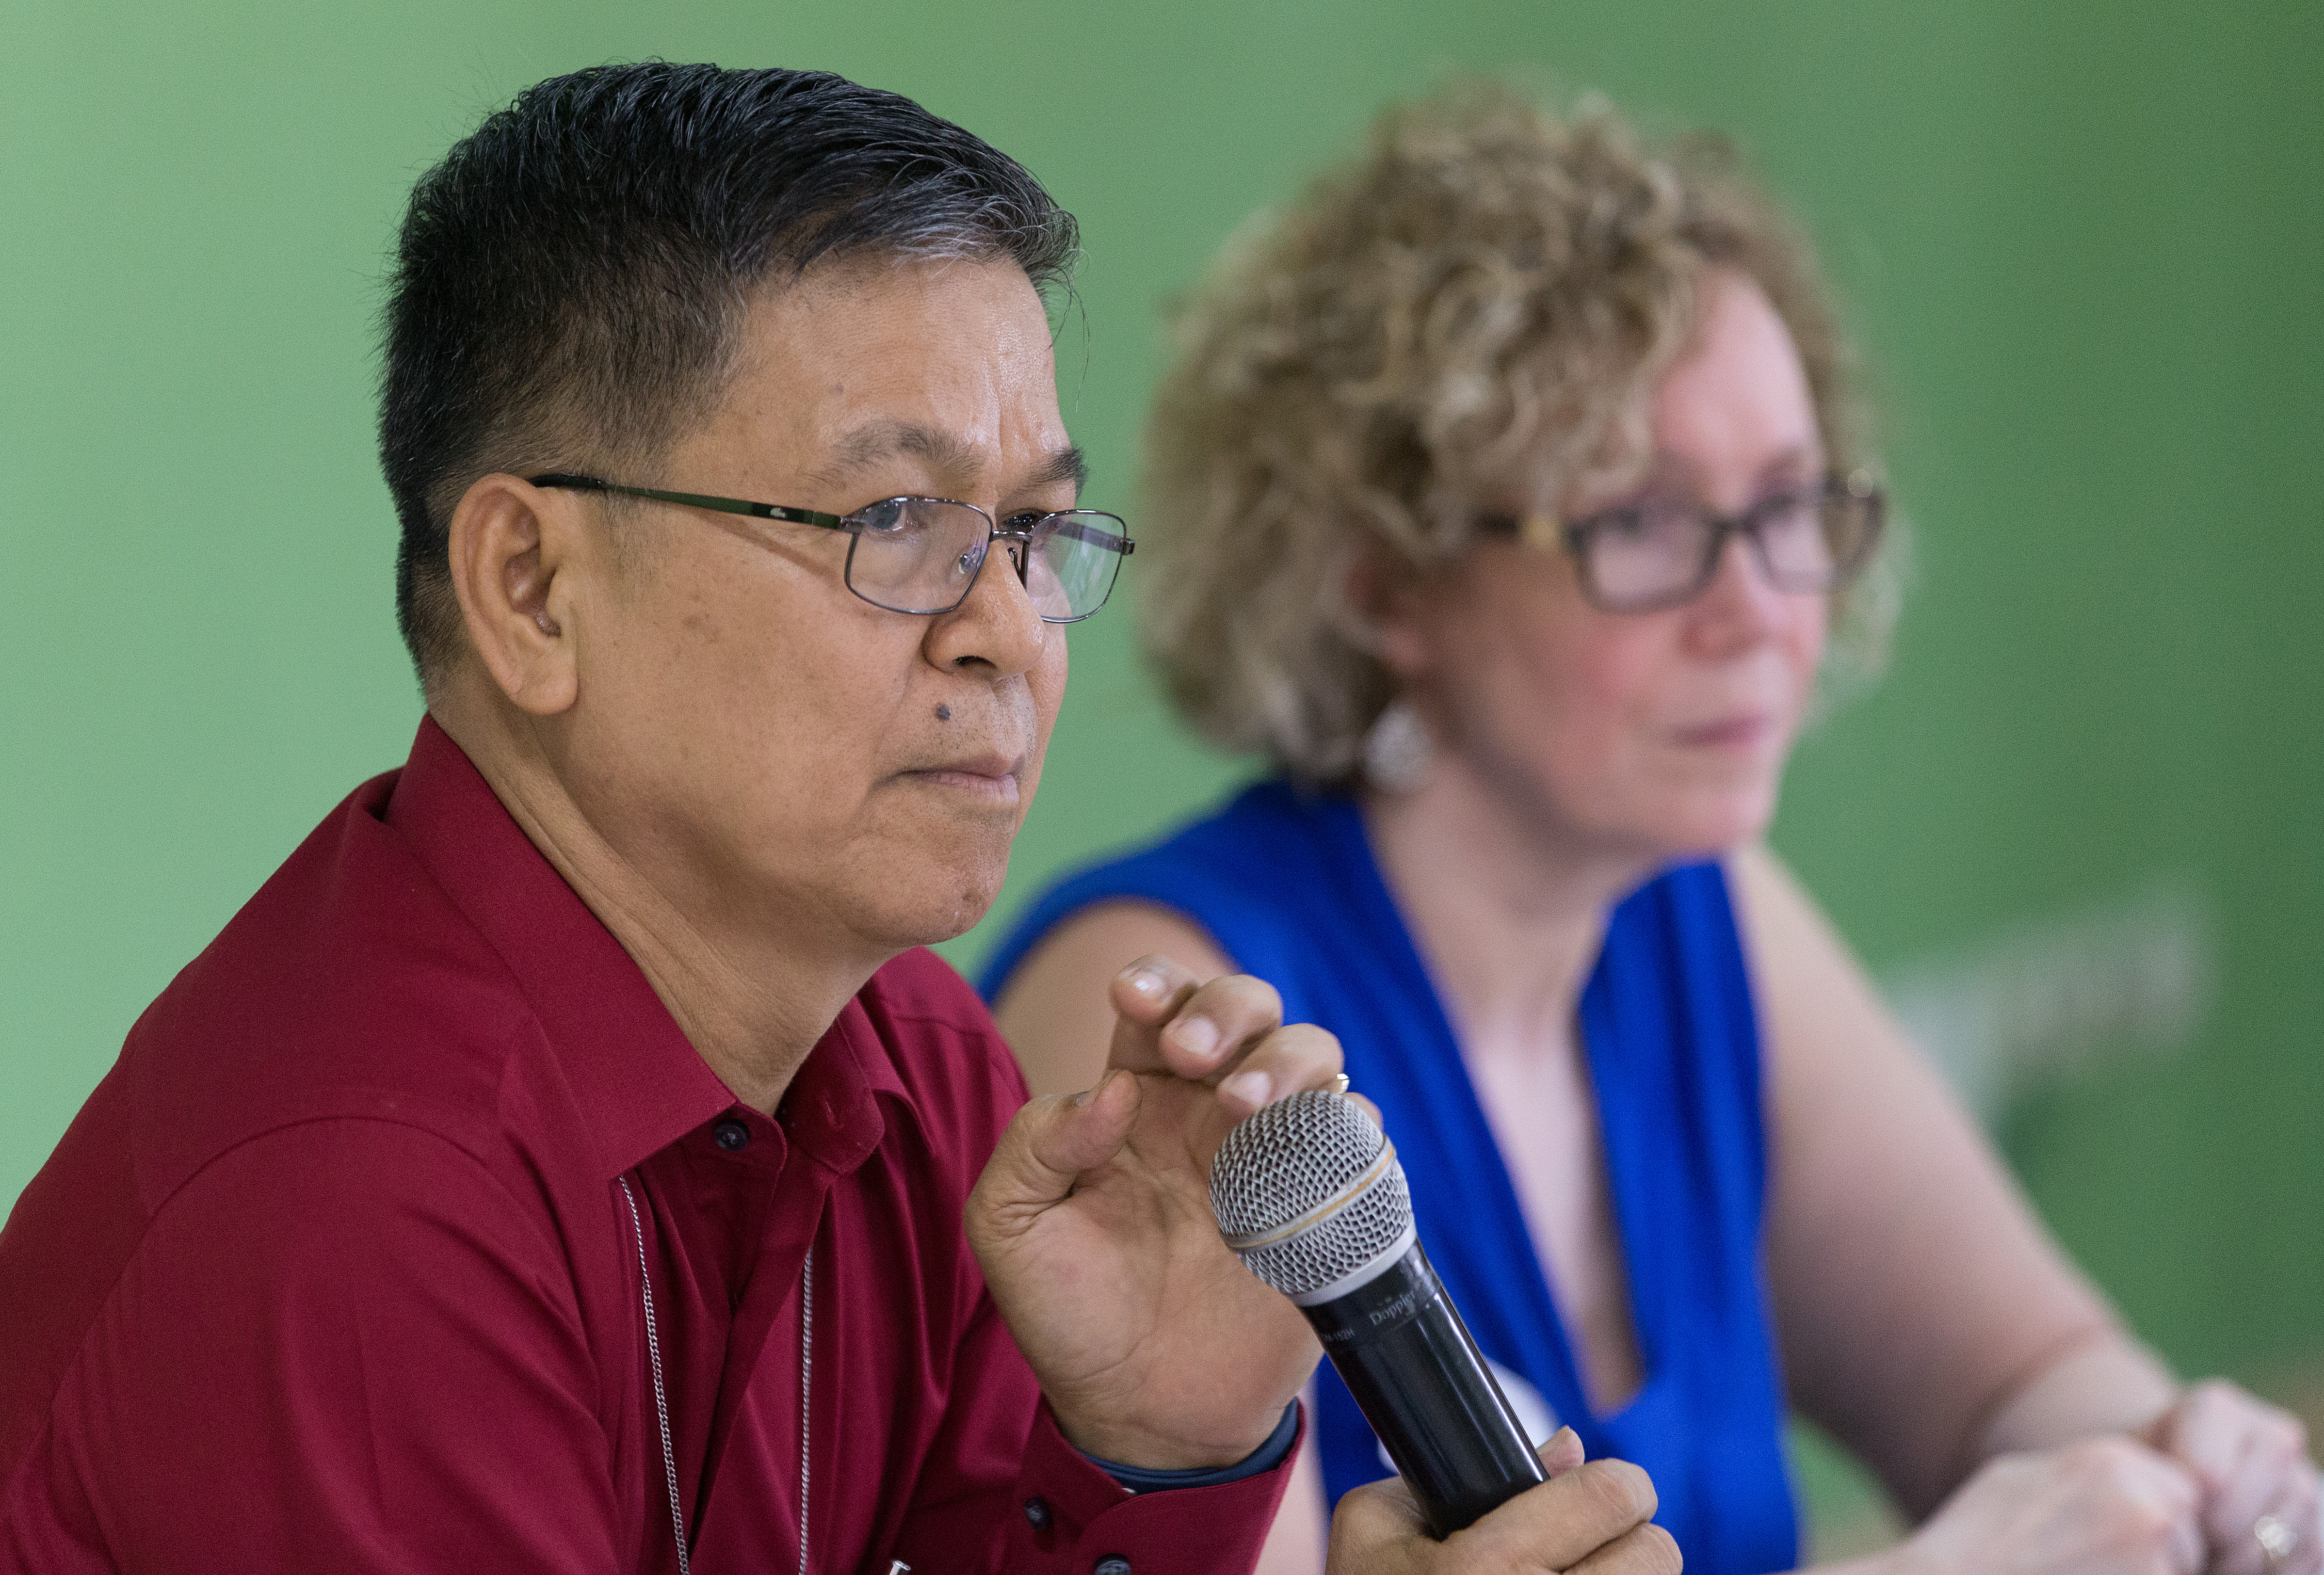 Bishop Ciriaco Q. Francisco (left) presides over a meeting of the United Methodist Committee on Central Conference Matters in Abidjan, Côte d'Ivoire. At right is the Rev. Deanna Stickley-Miner. Photo by Mike DuBose, UMNS.